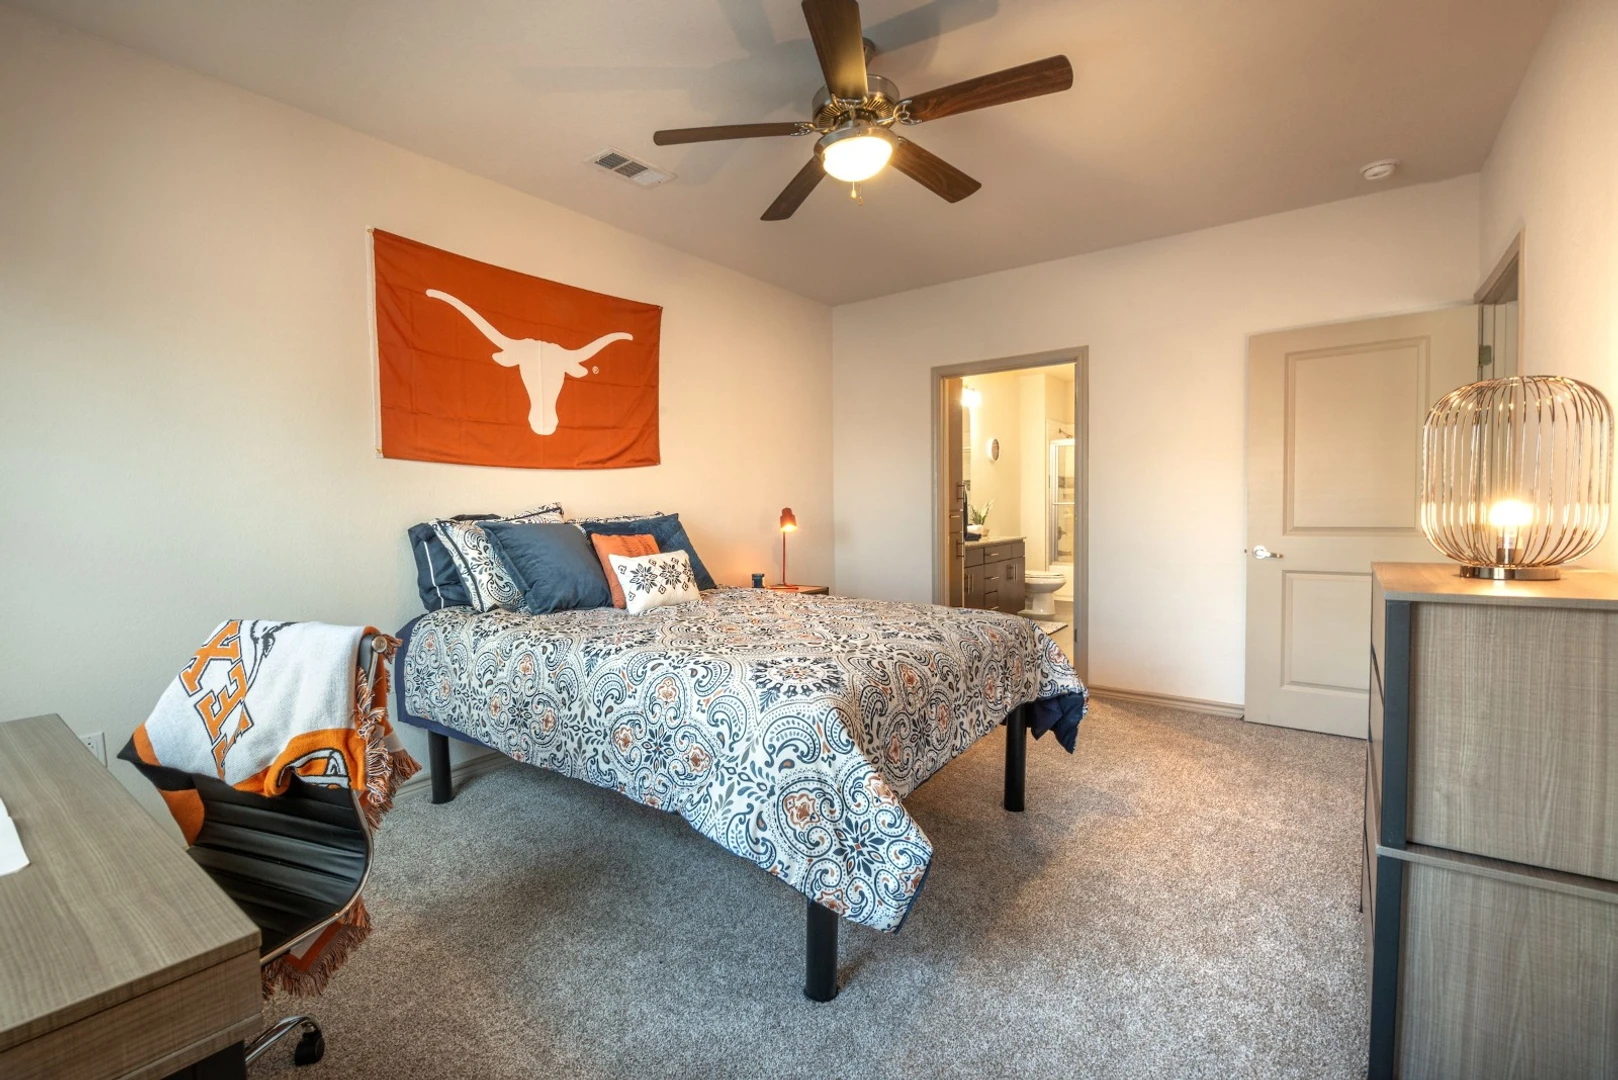 Accommodation in the centre of Austin